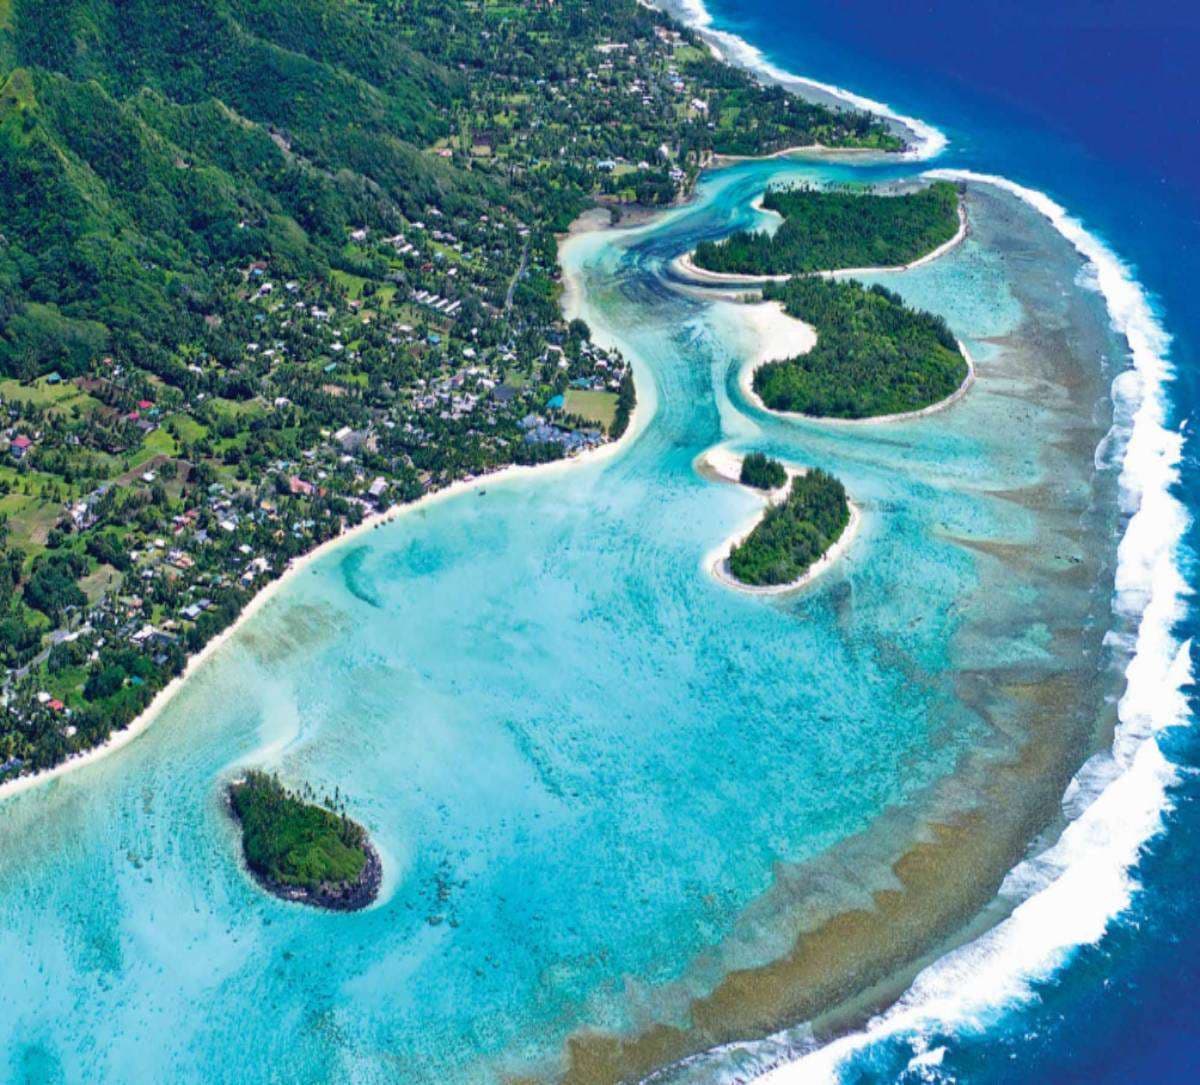 The cook islands